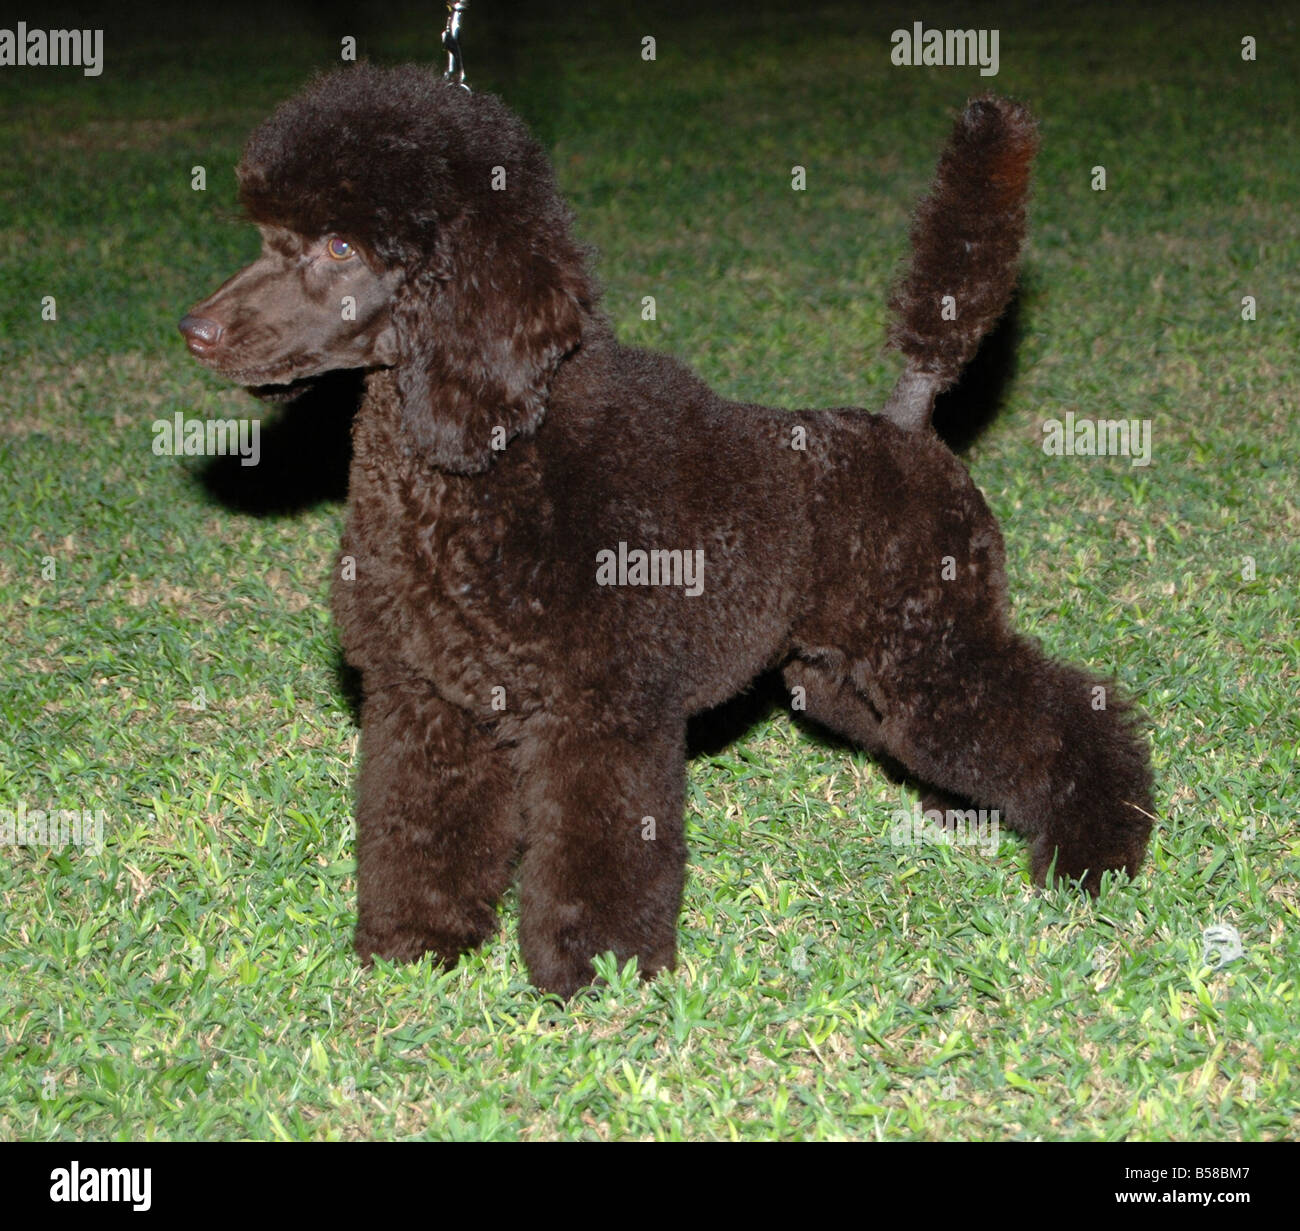 poodle toy chocolate